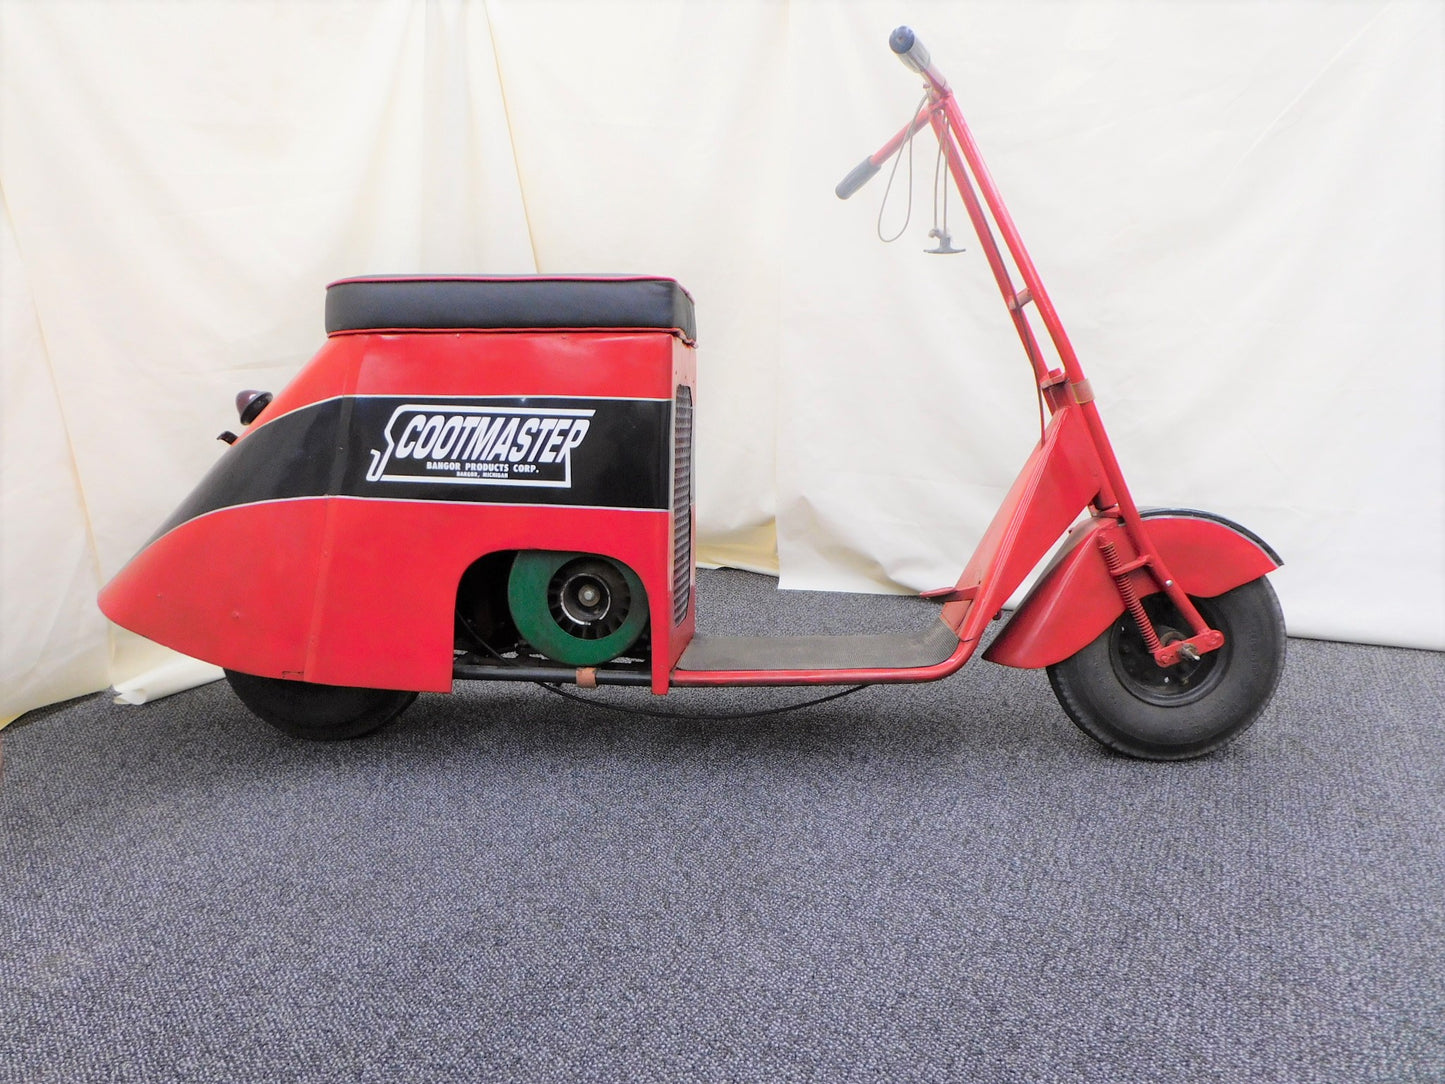 1940s Scootmaster Scooter